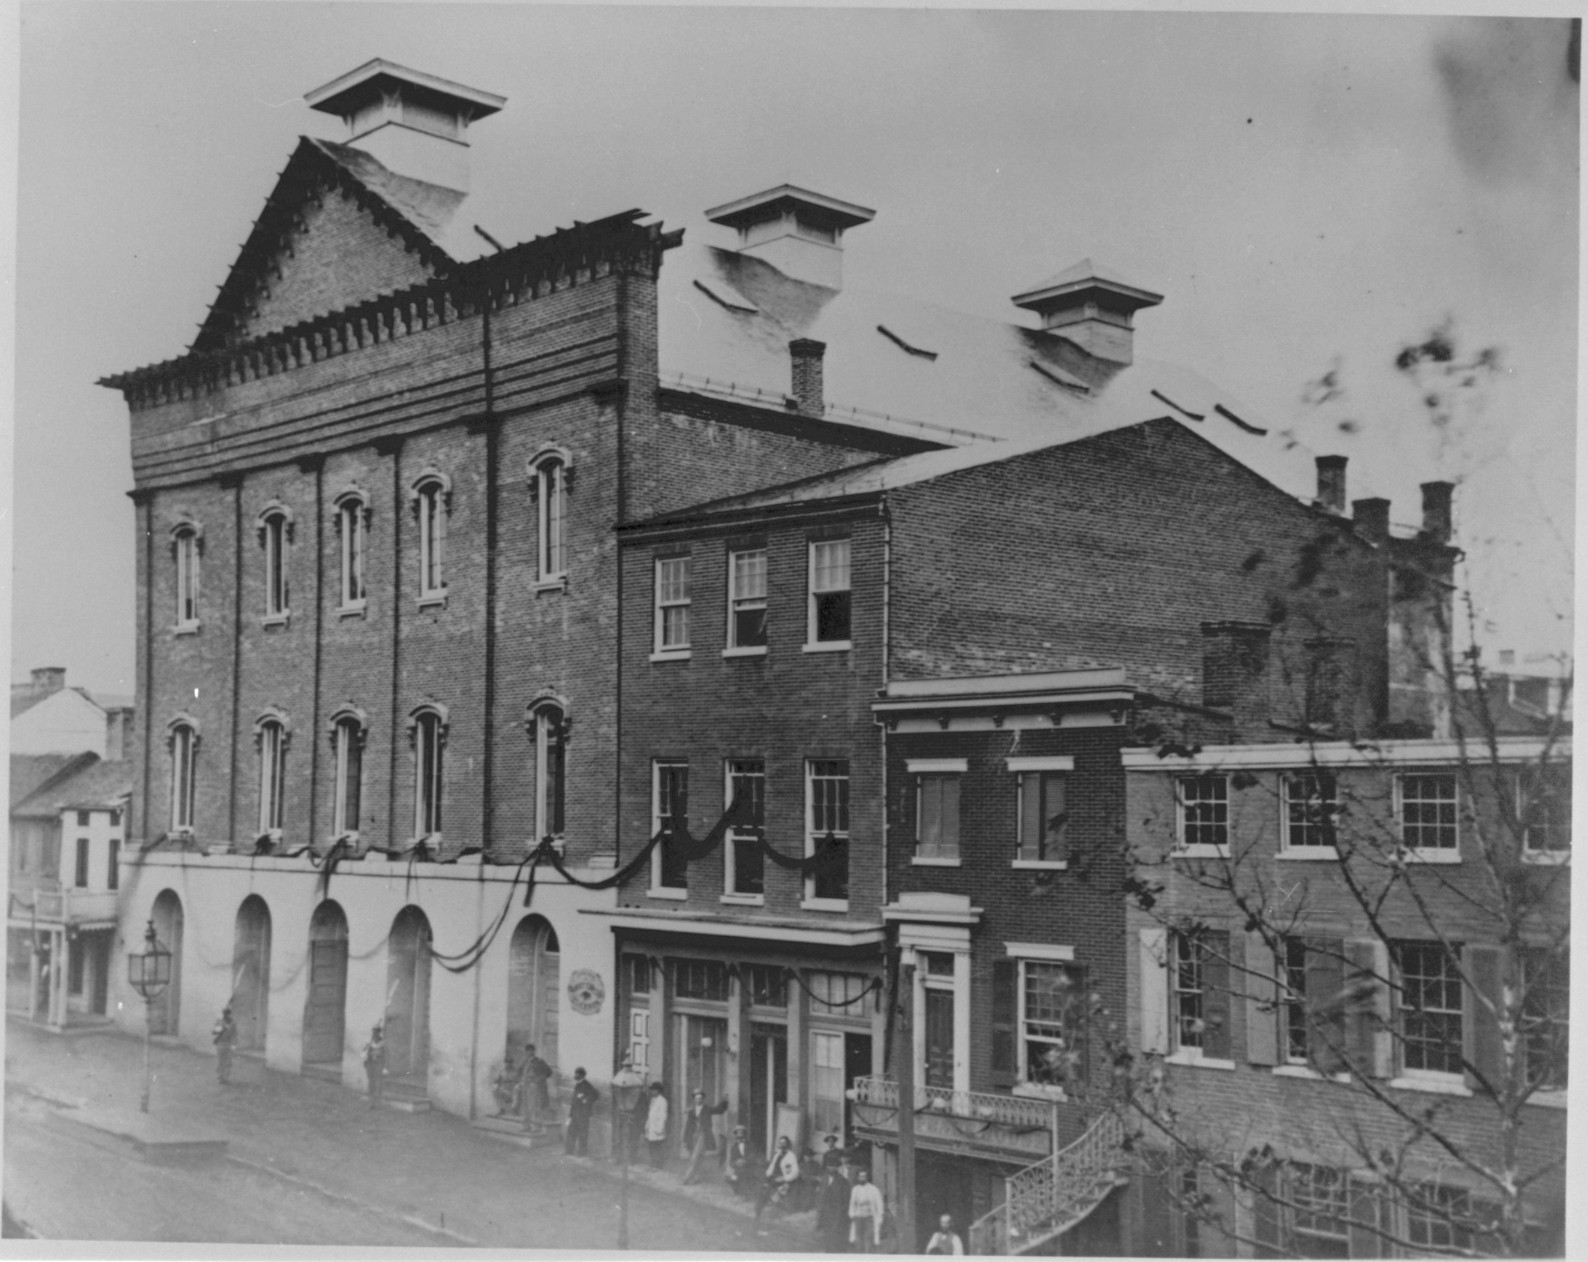 1865 black and white photograph of the exterior of Ford's Theatre in D.C. The image shows drapes of black fabric hanging horizontally between each window in mourning for the death of Abraham Lincoln.